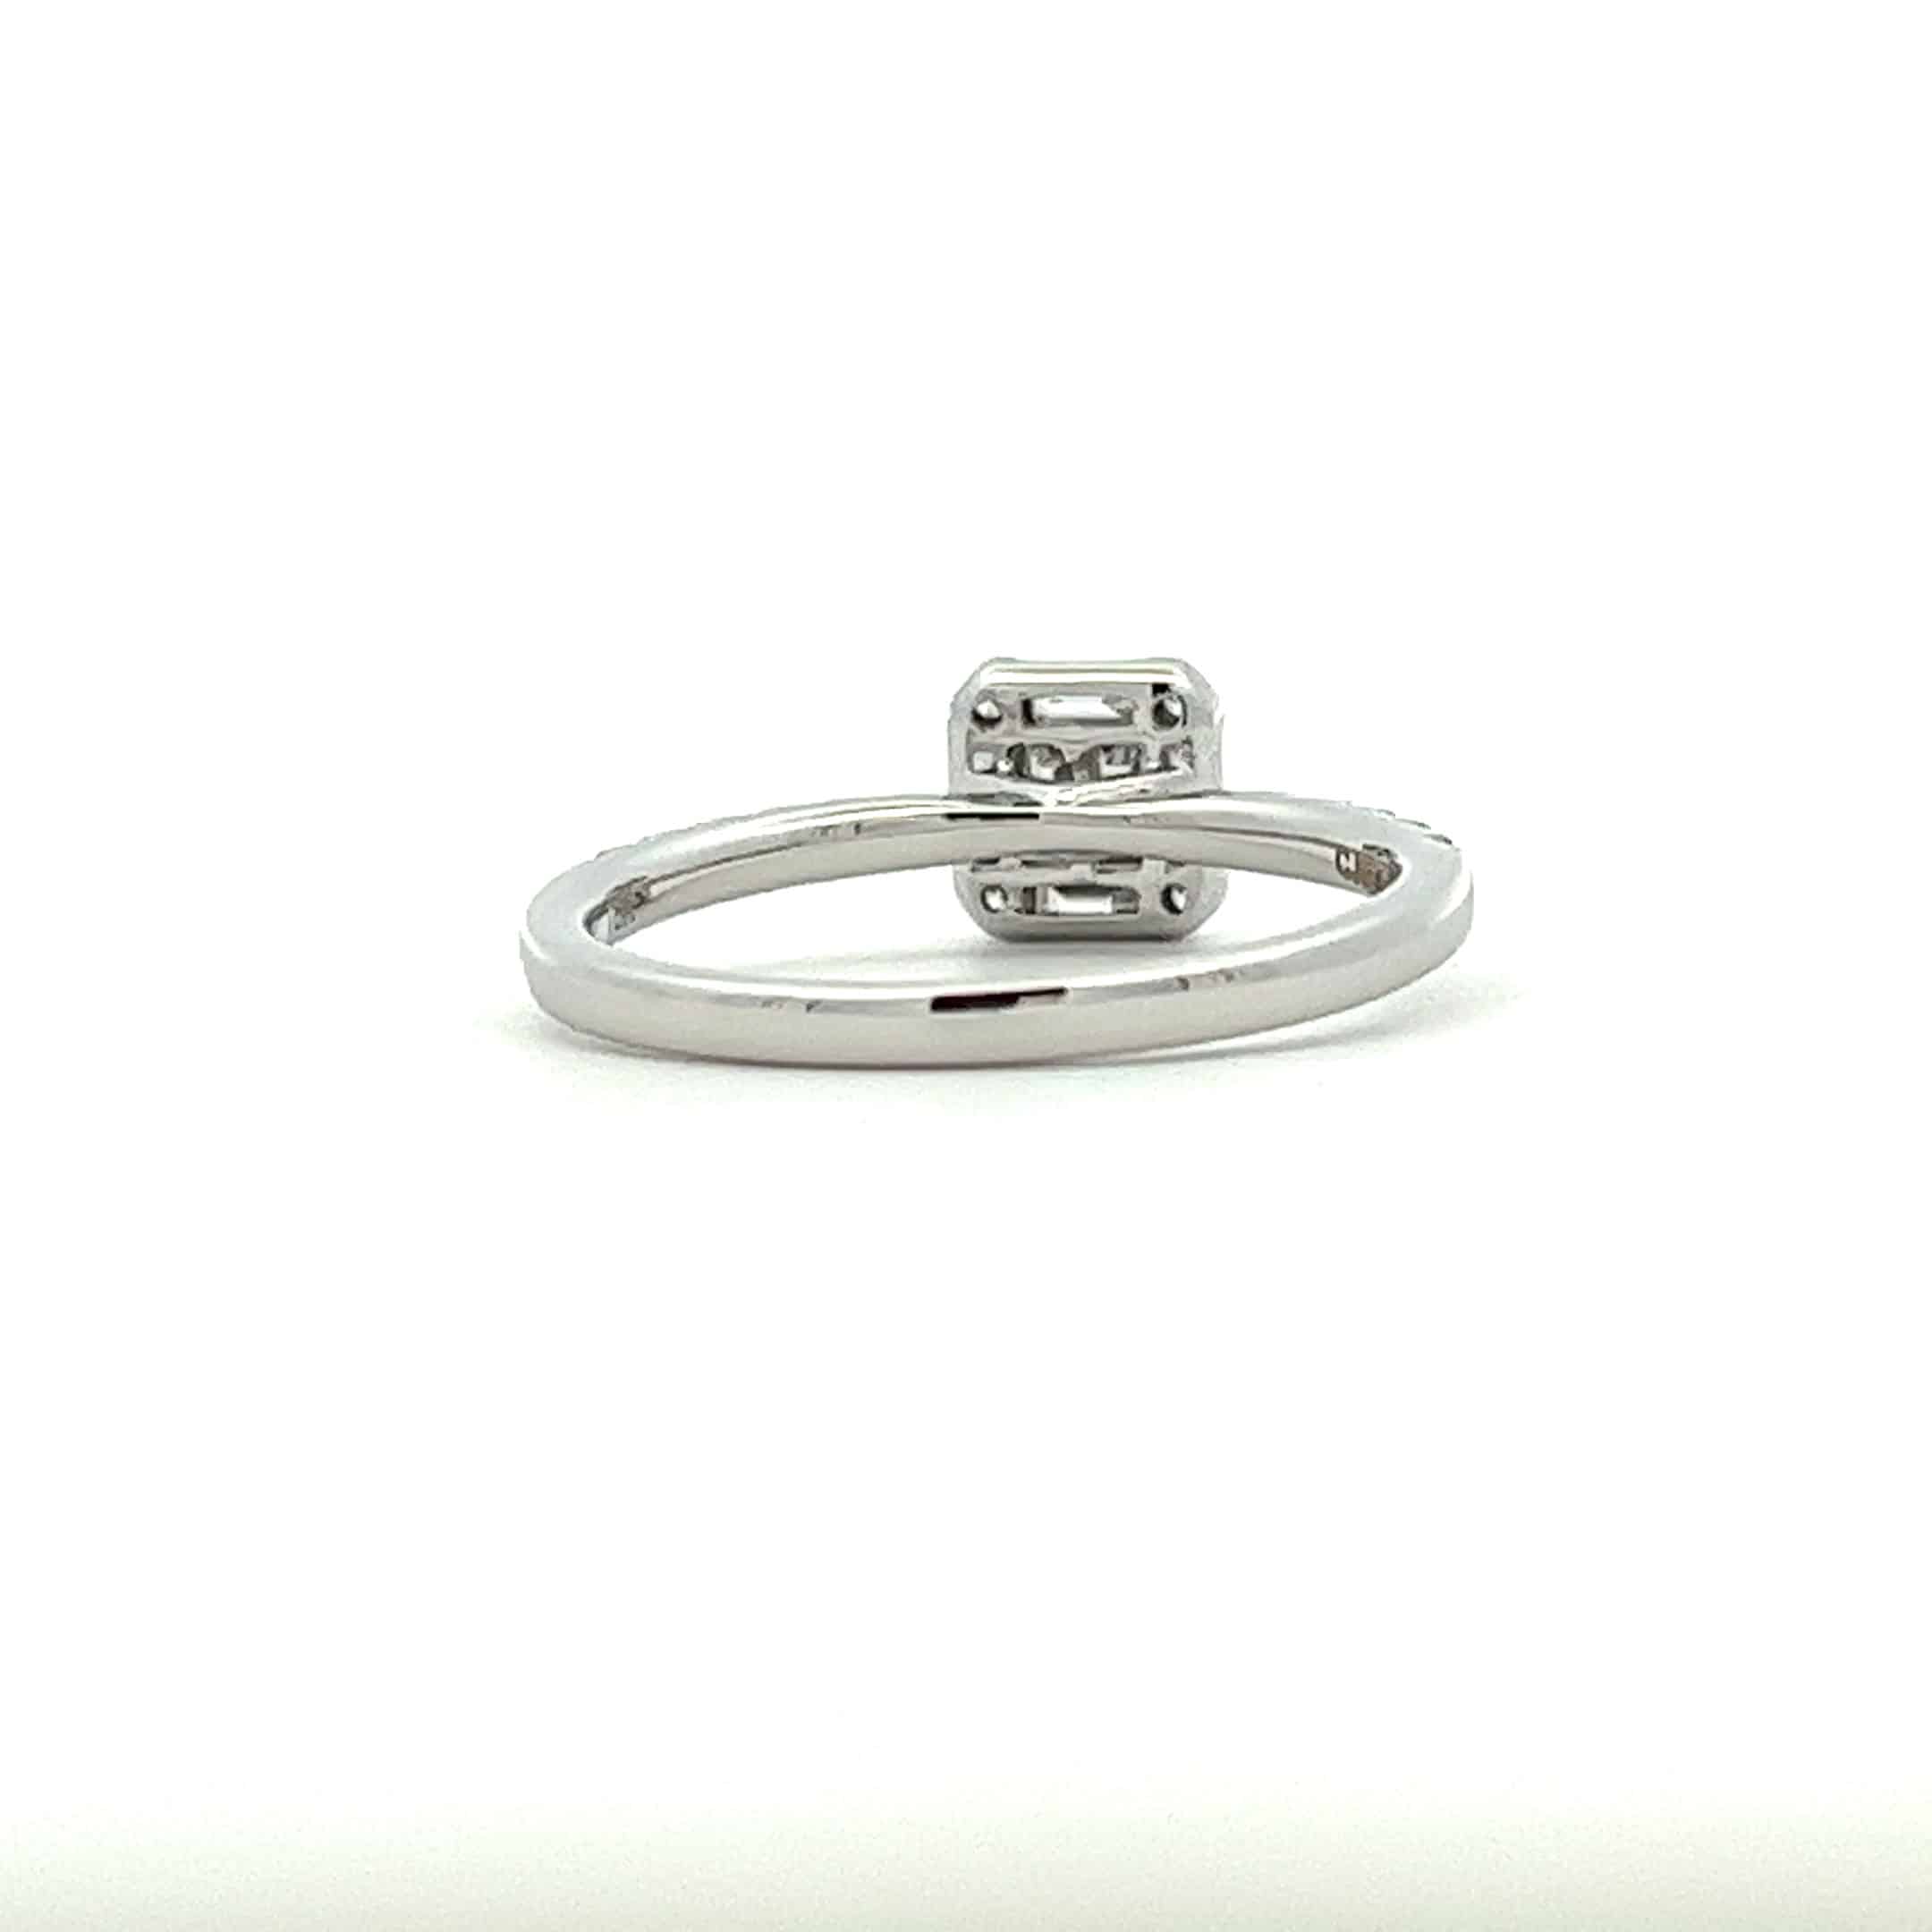 18ct White Gold Diamond Engagement Ring with Diamond Set Shoulders